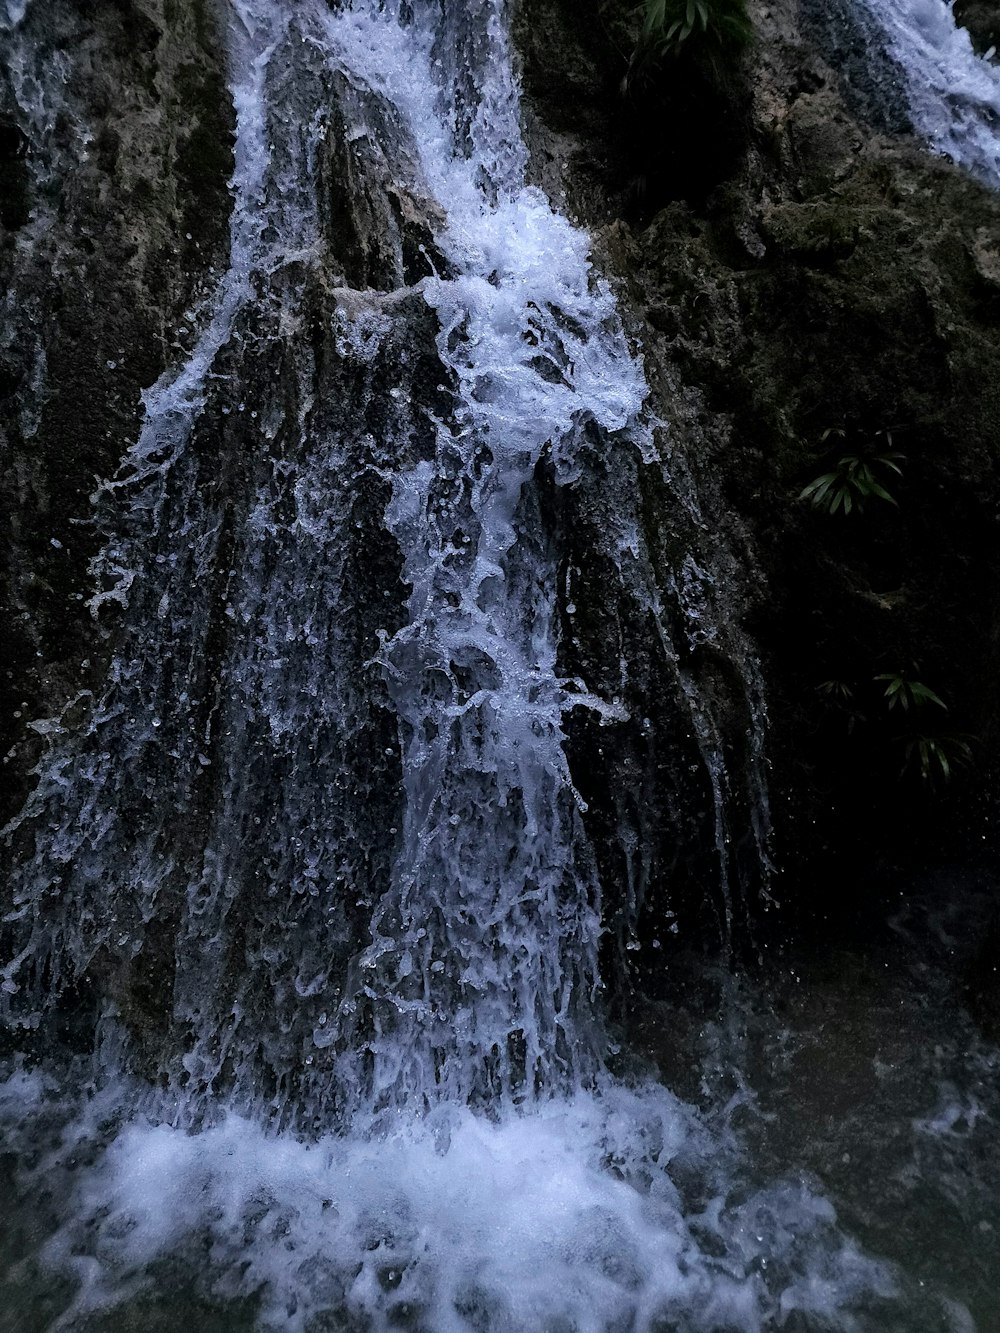 a waterfall with rocks and plants